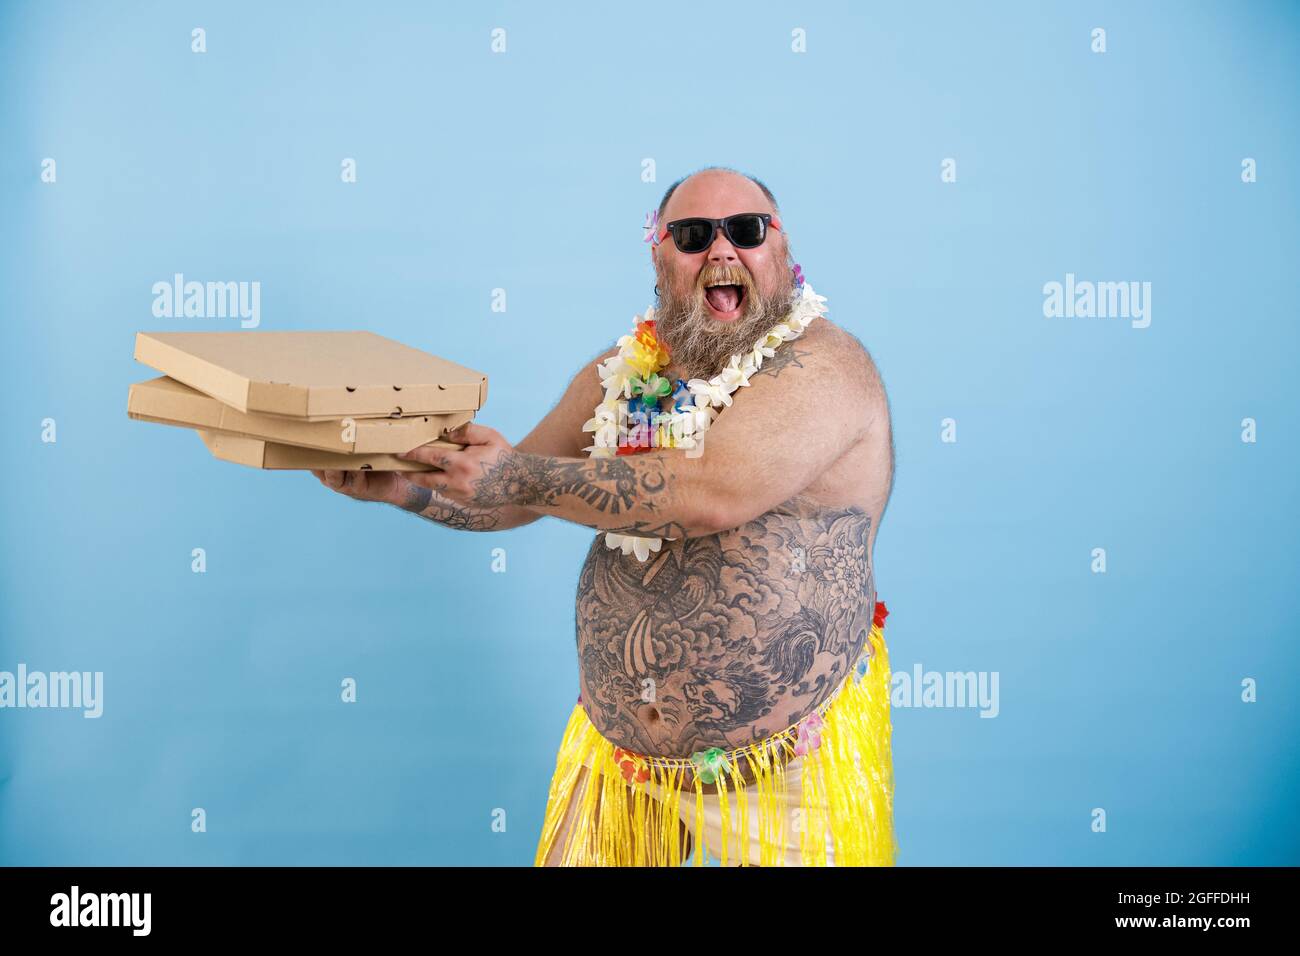 Happy obese man in grass skirt and flowers garland holds pizzas on light blue background Stock Photo